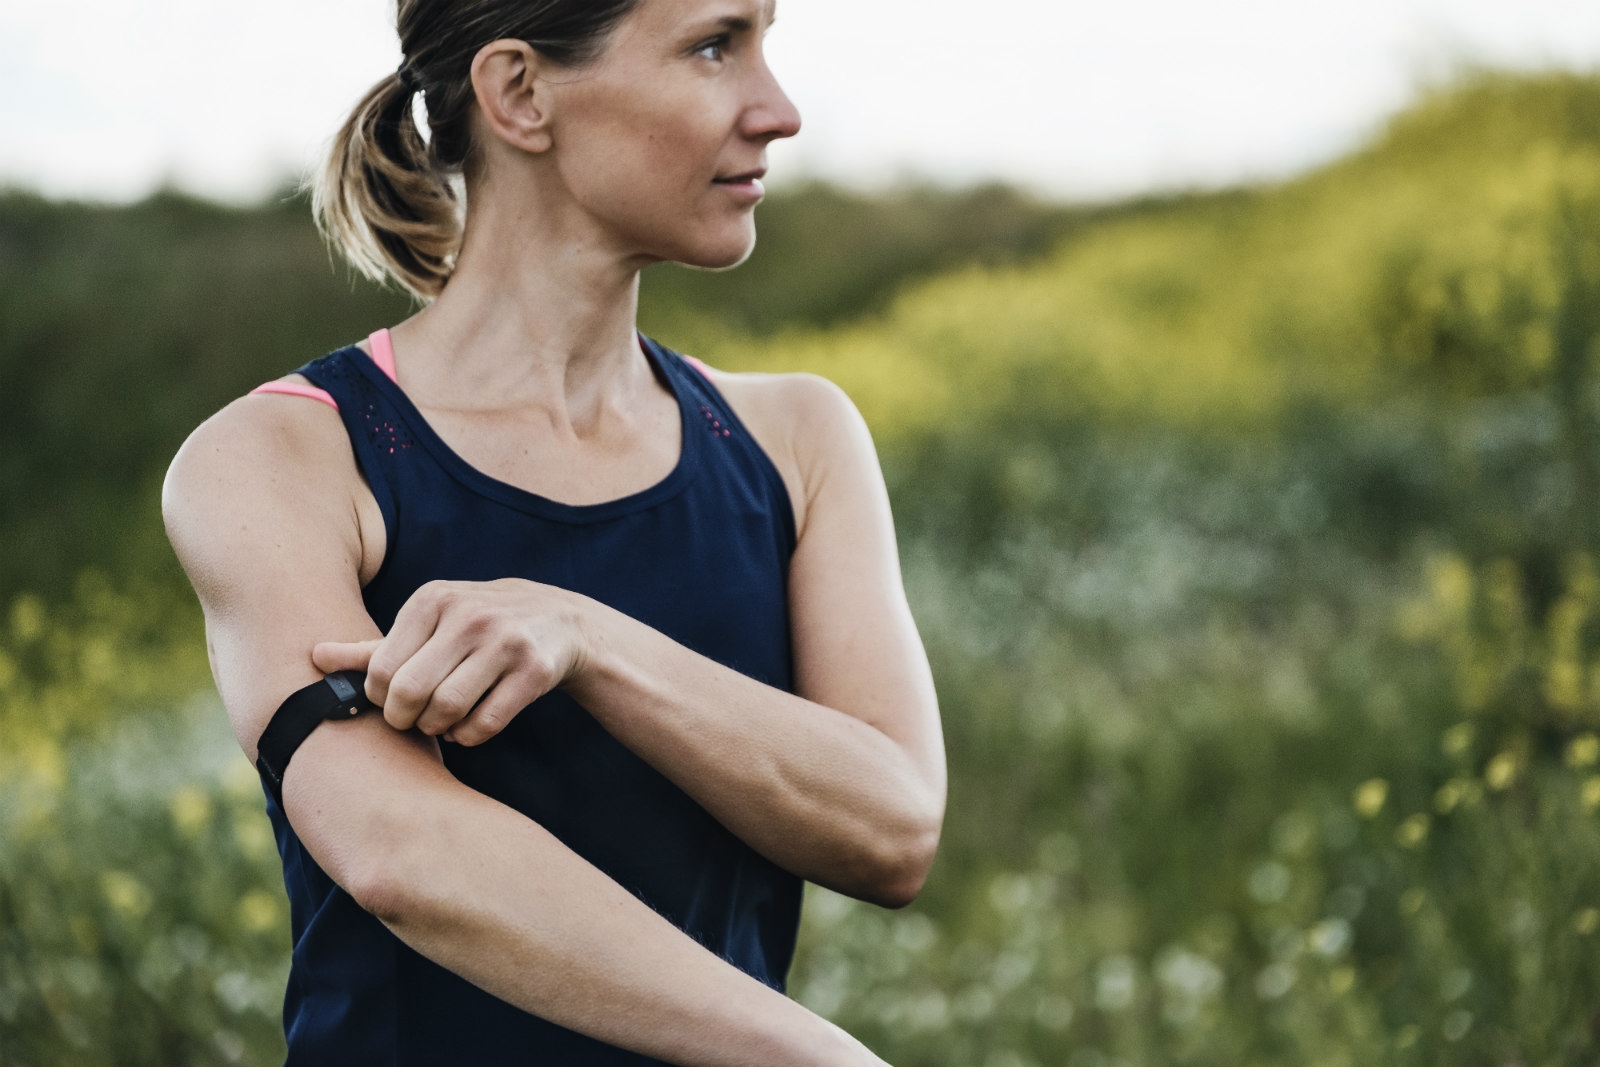 Polar unveils an affordable heart rate tracking armband | DeviceDaily.com